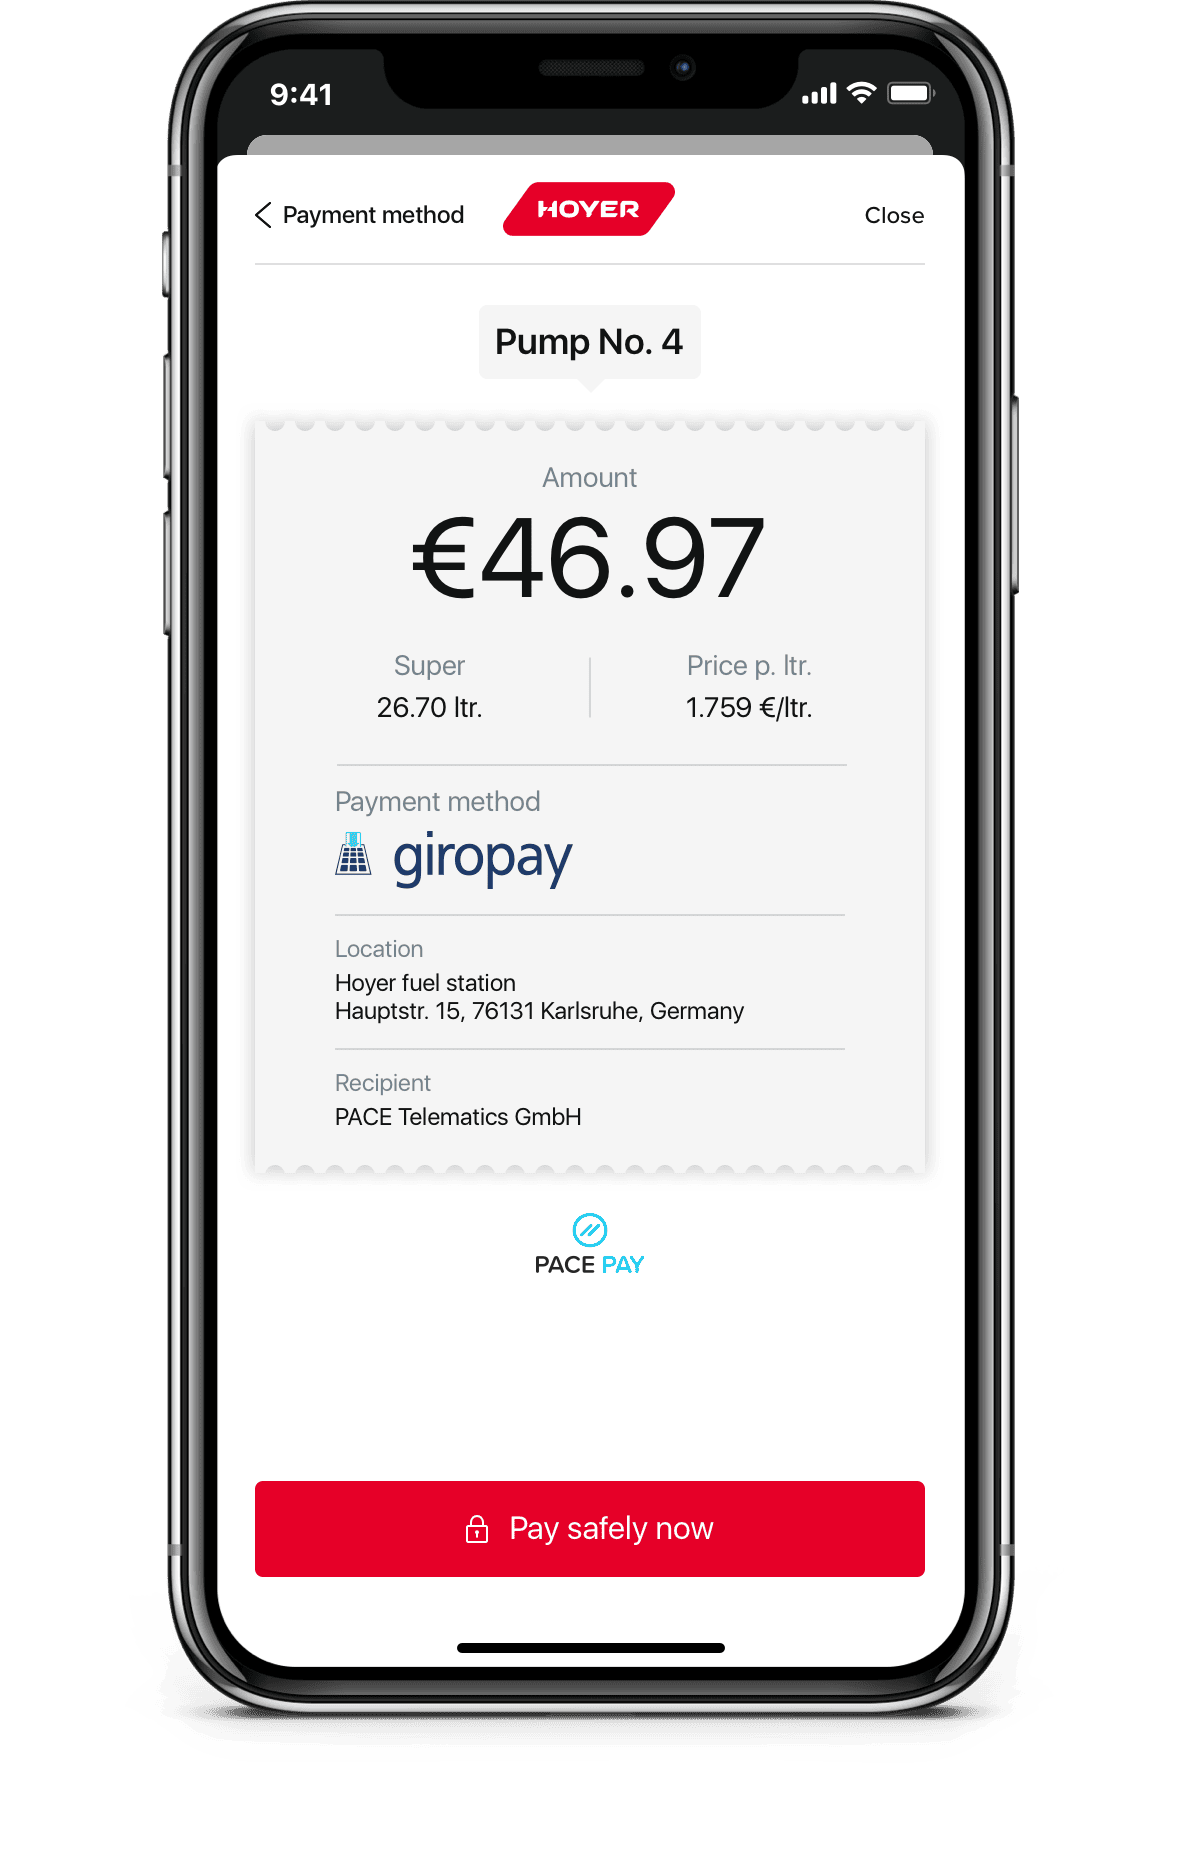 Pay safely with PACE Pay